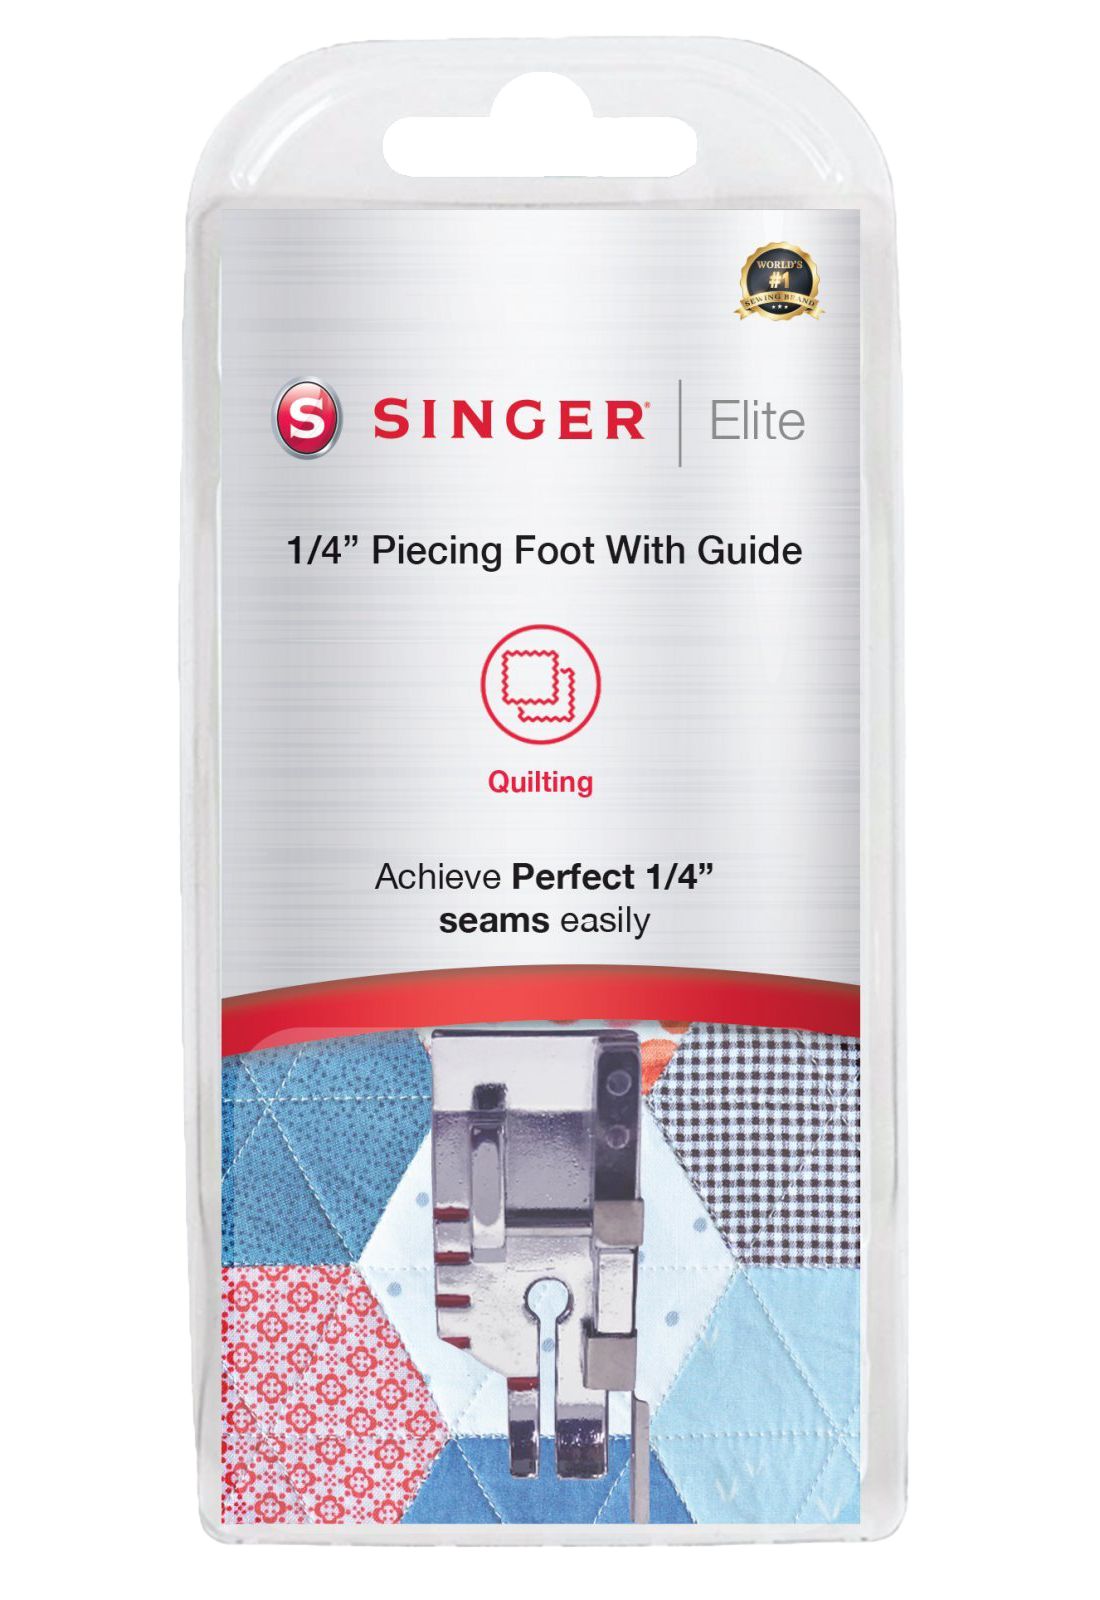 Singer Elite 1/4" Piecing Foot with Guide 250065796